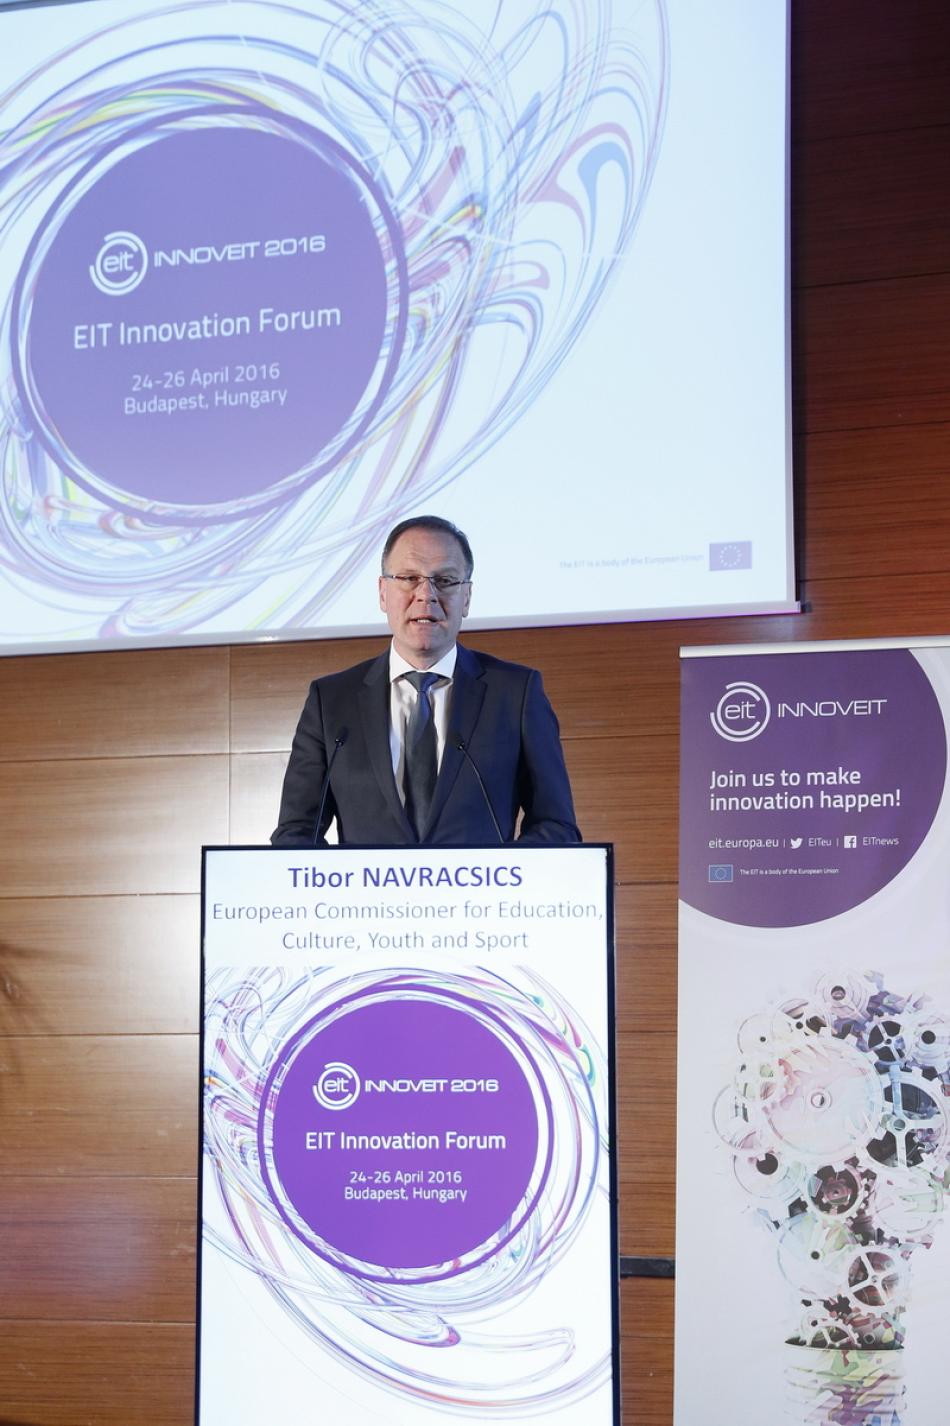 INNOVEIT 2016 - EIT Innovation Forum - Tibor Navracsics, European Commissioner for Education, Culture, Youth and Sport